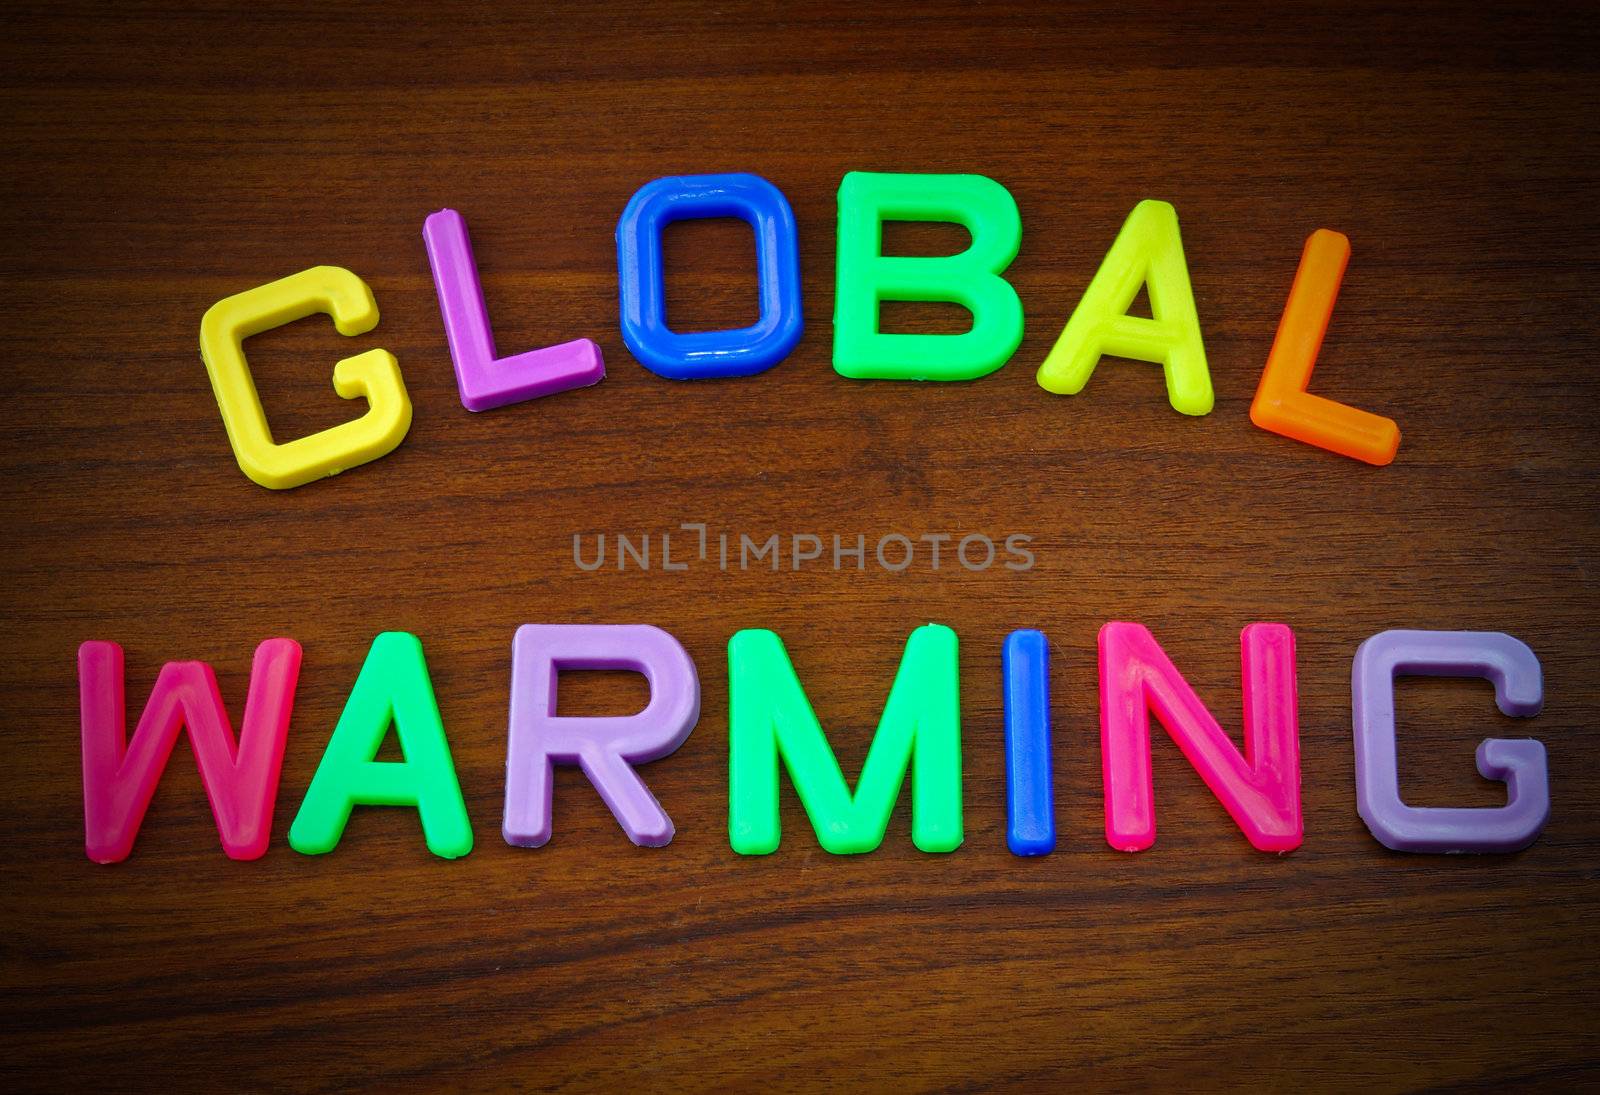 Global warming in colorful toy letters on wood background